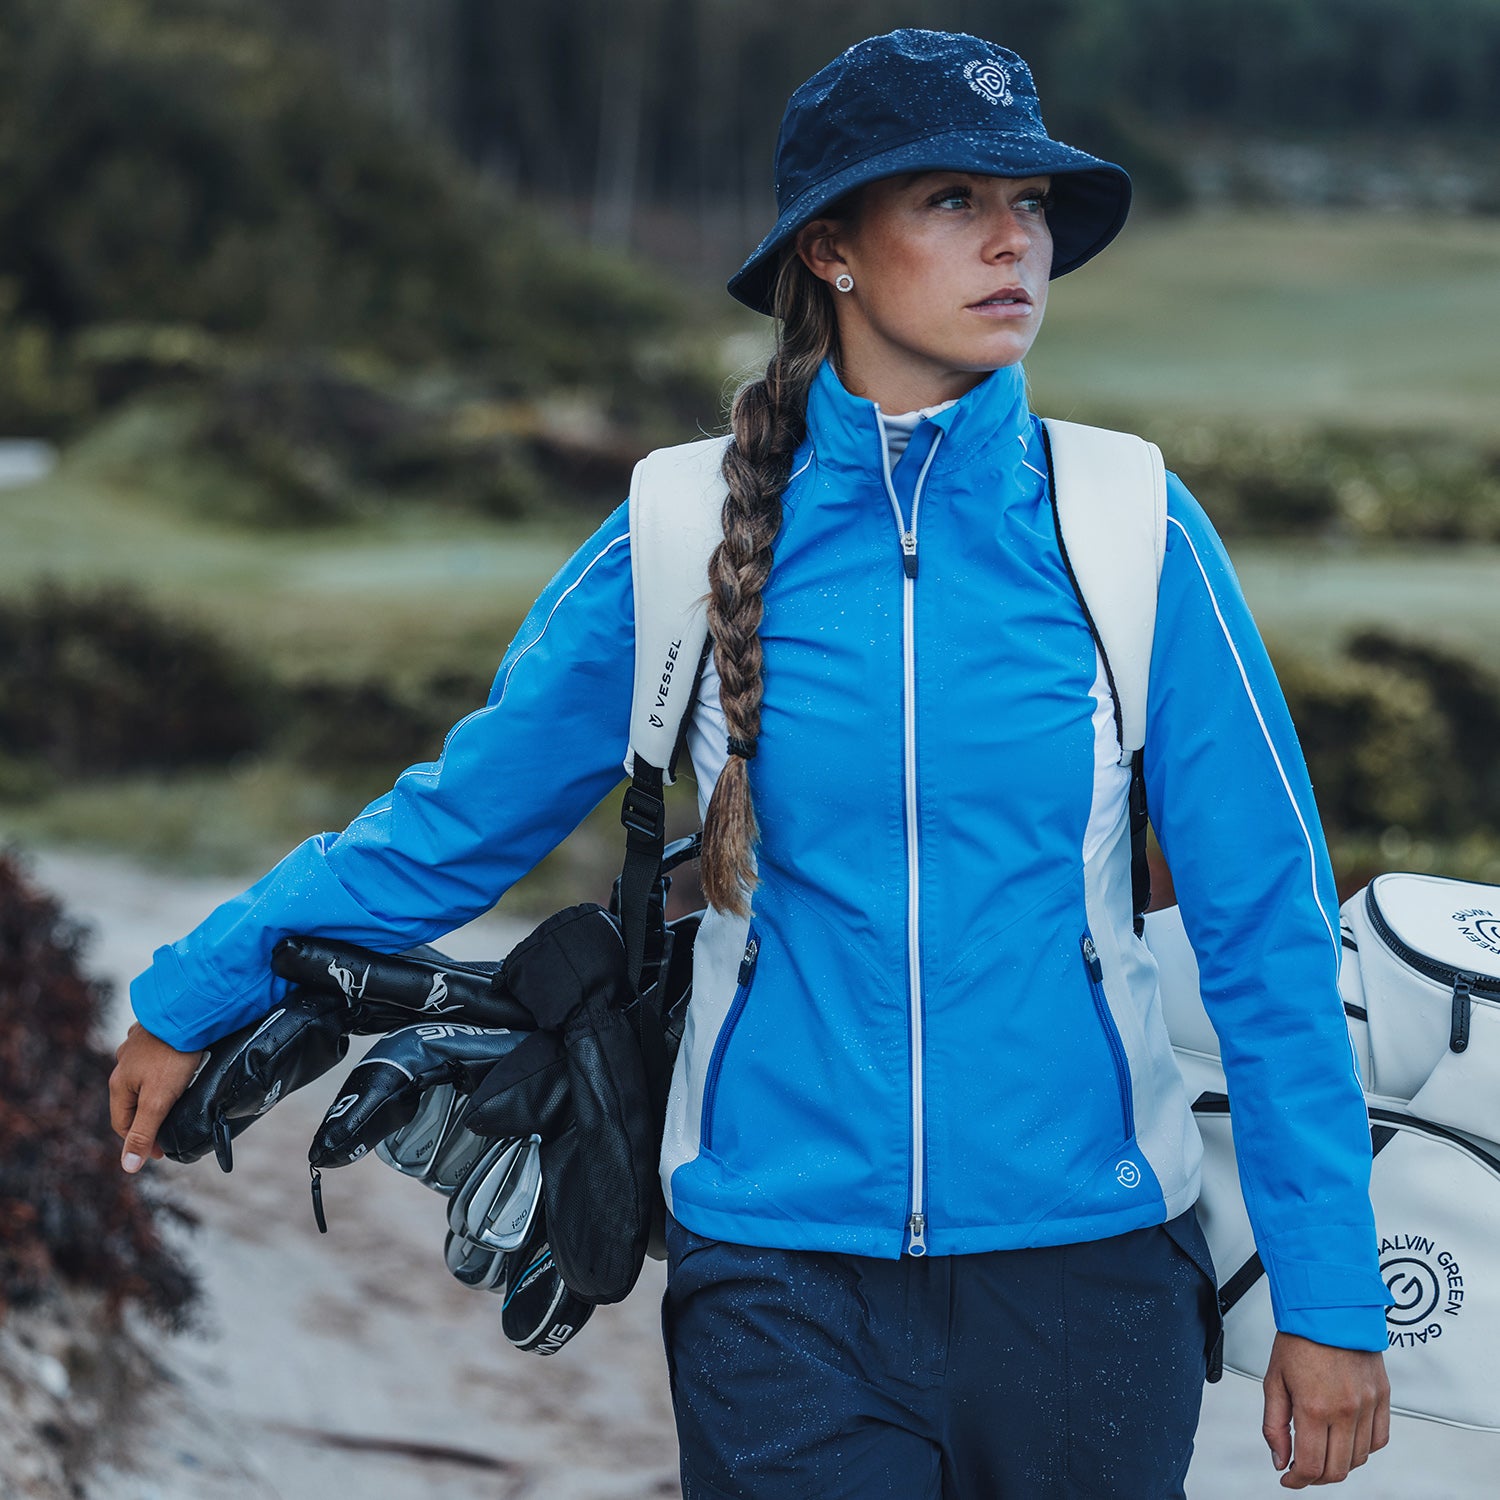 Galvin Green Ladies GORE-TEX Paclite Jacket with Contrast Panels in Blue/Cool Grey/White